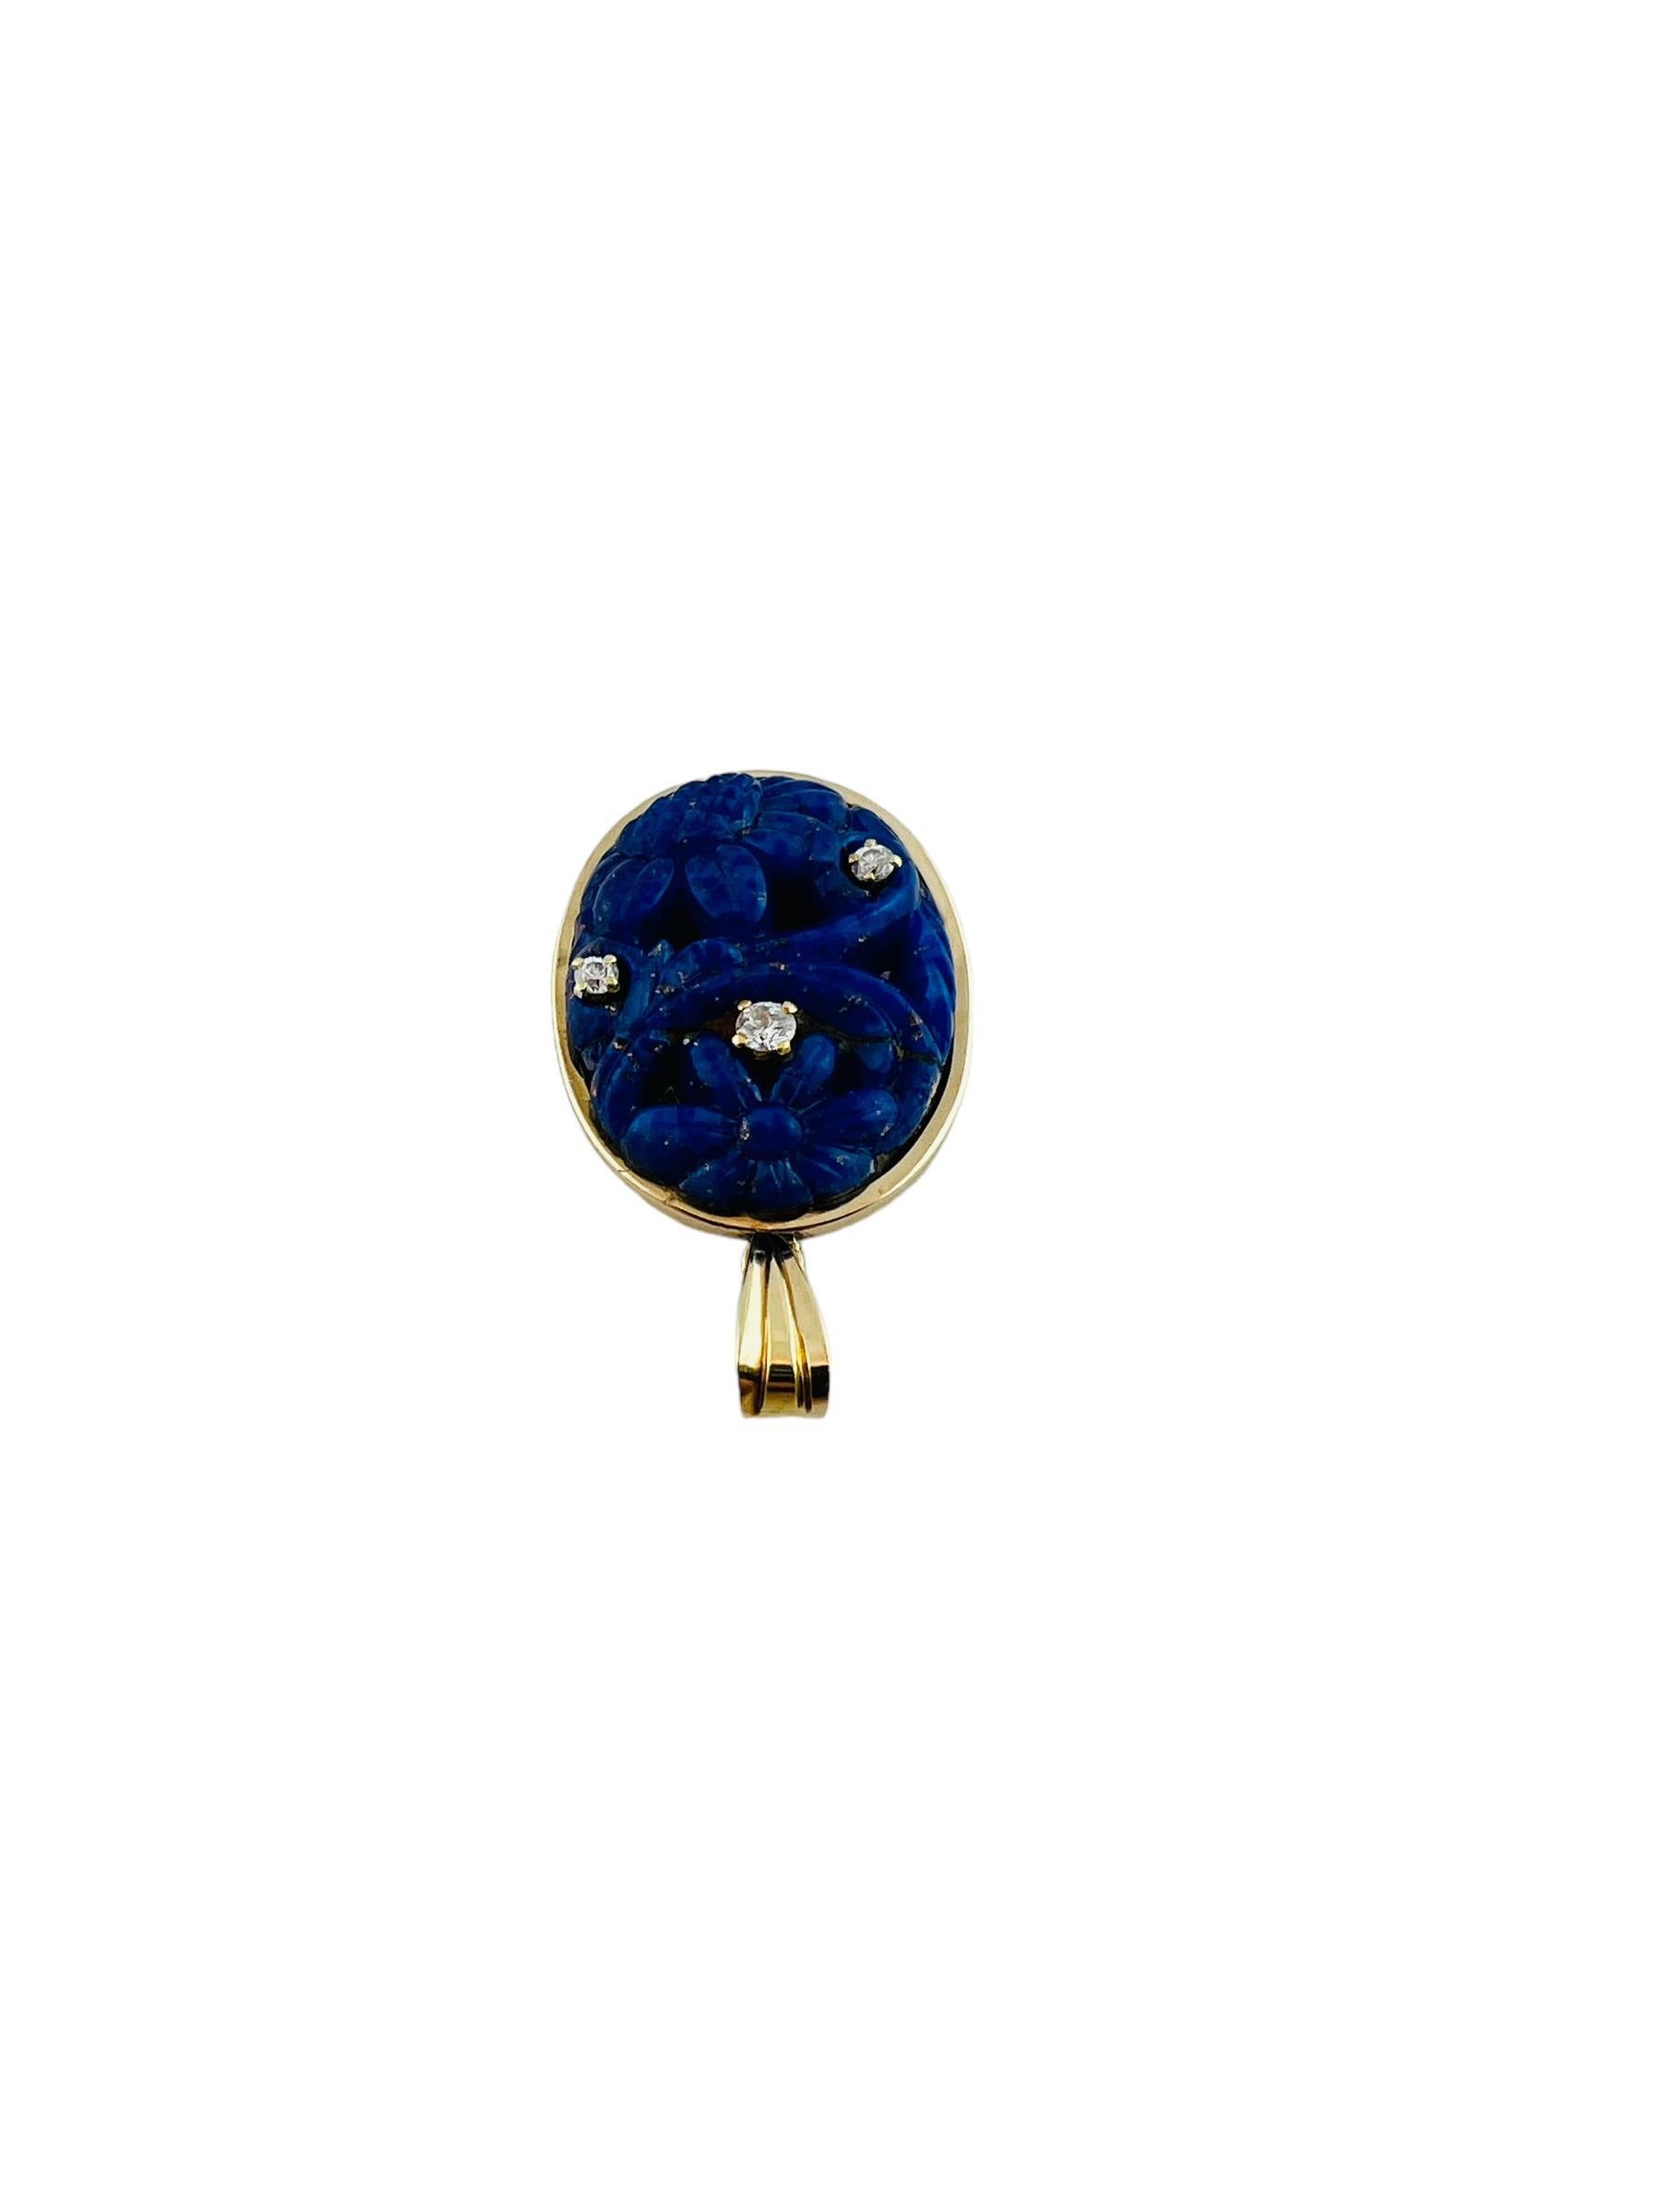 This beautiful oval yellow gold pendant is set with carved lapis lazuli in a floral motif 

This pendant is from St. Petersburg, Russia 1908 - 1927

The pendant is stamped with hallmark:
4 ( a weight mark/zolotniks) 
head facing right (right facing